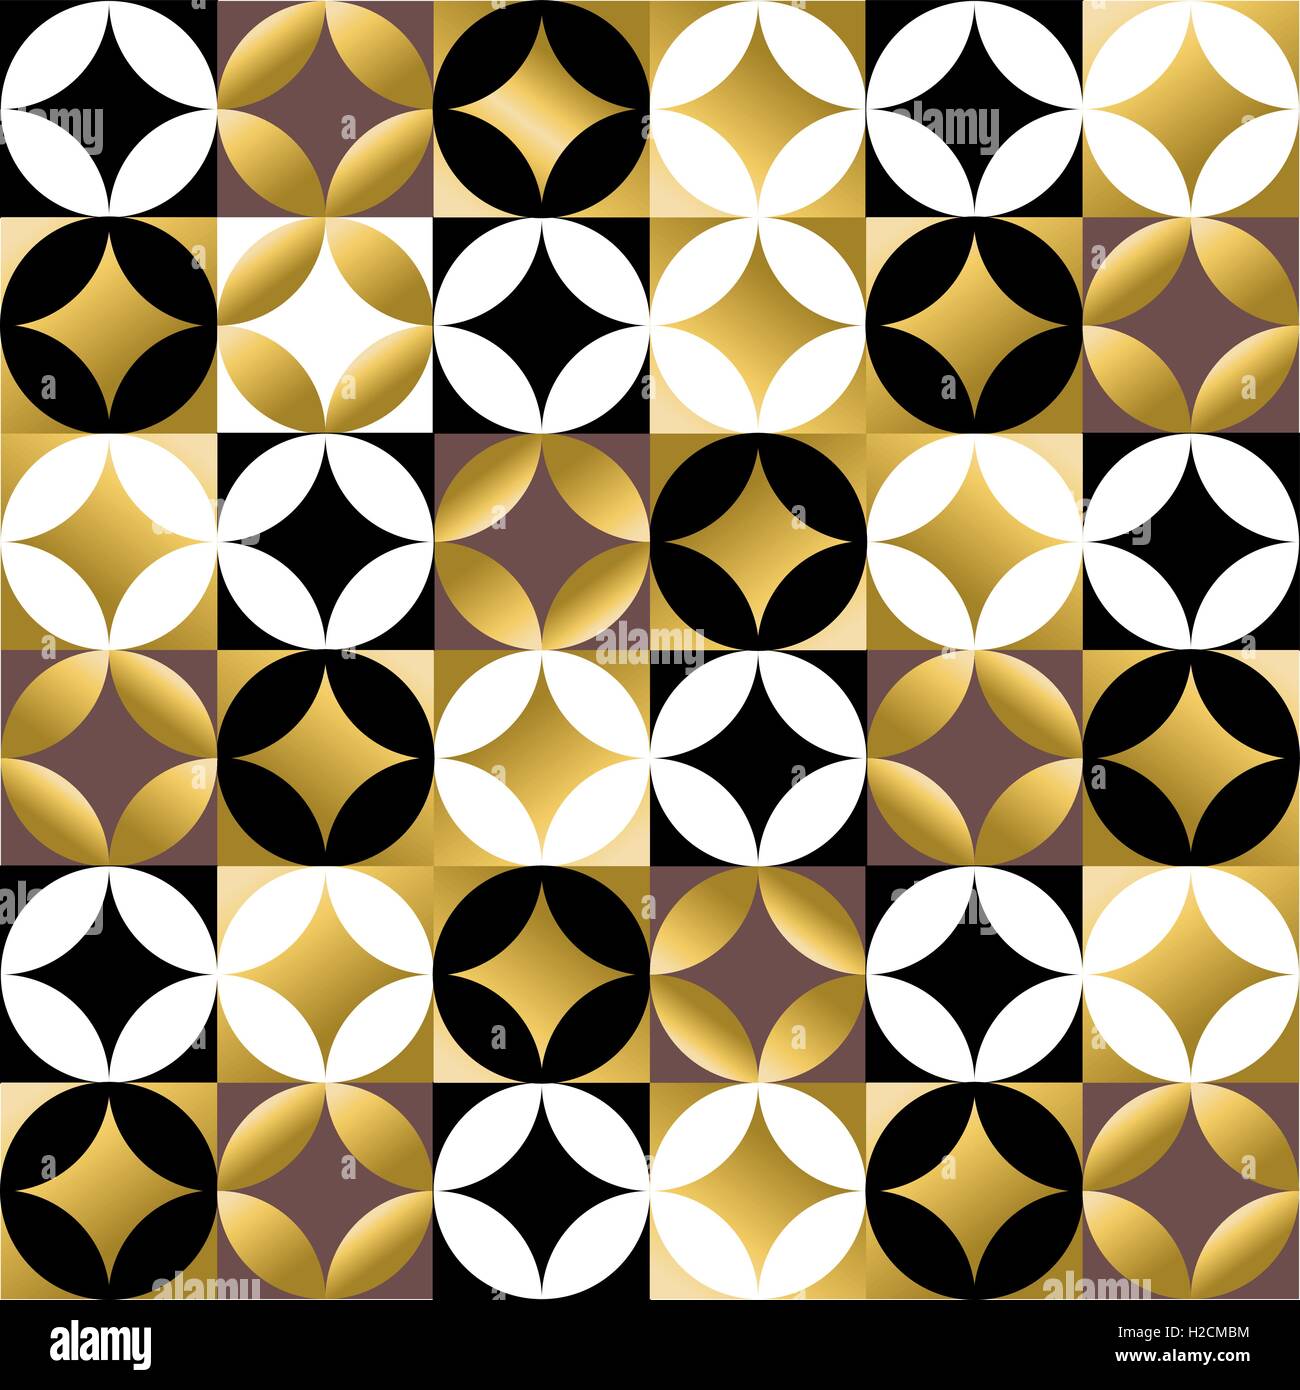 Vintage style decorative mosaic tile seamless pattern with gold color abstract geometric shapes. EPS10 vector. Stock Vector